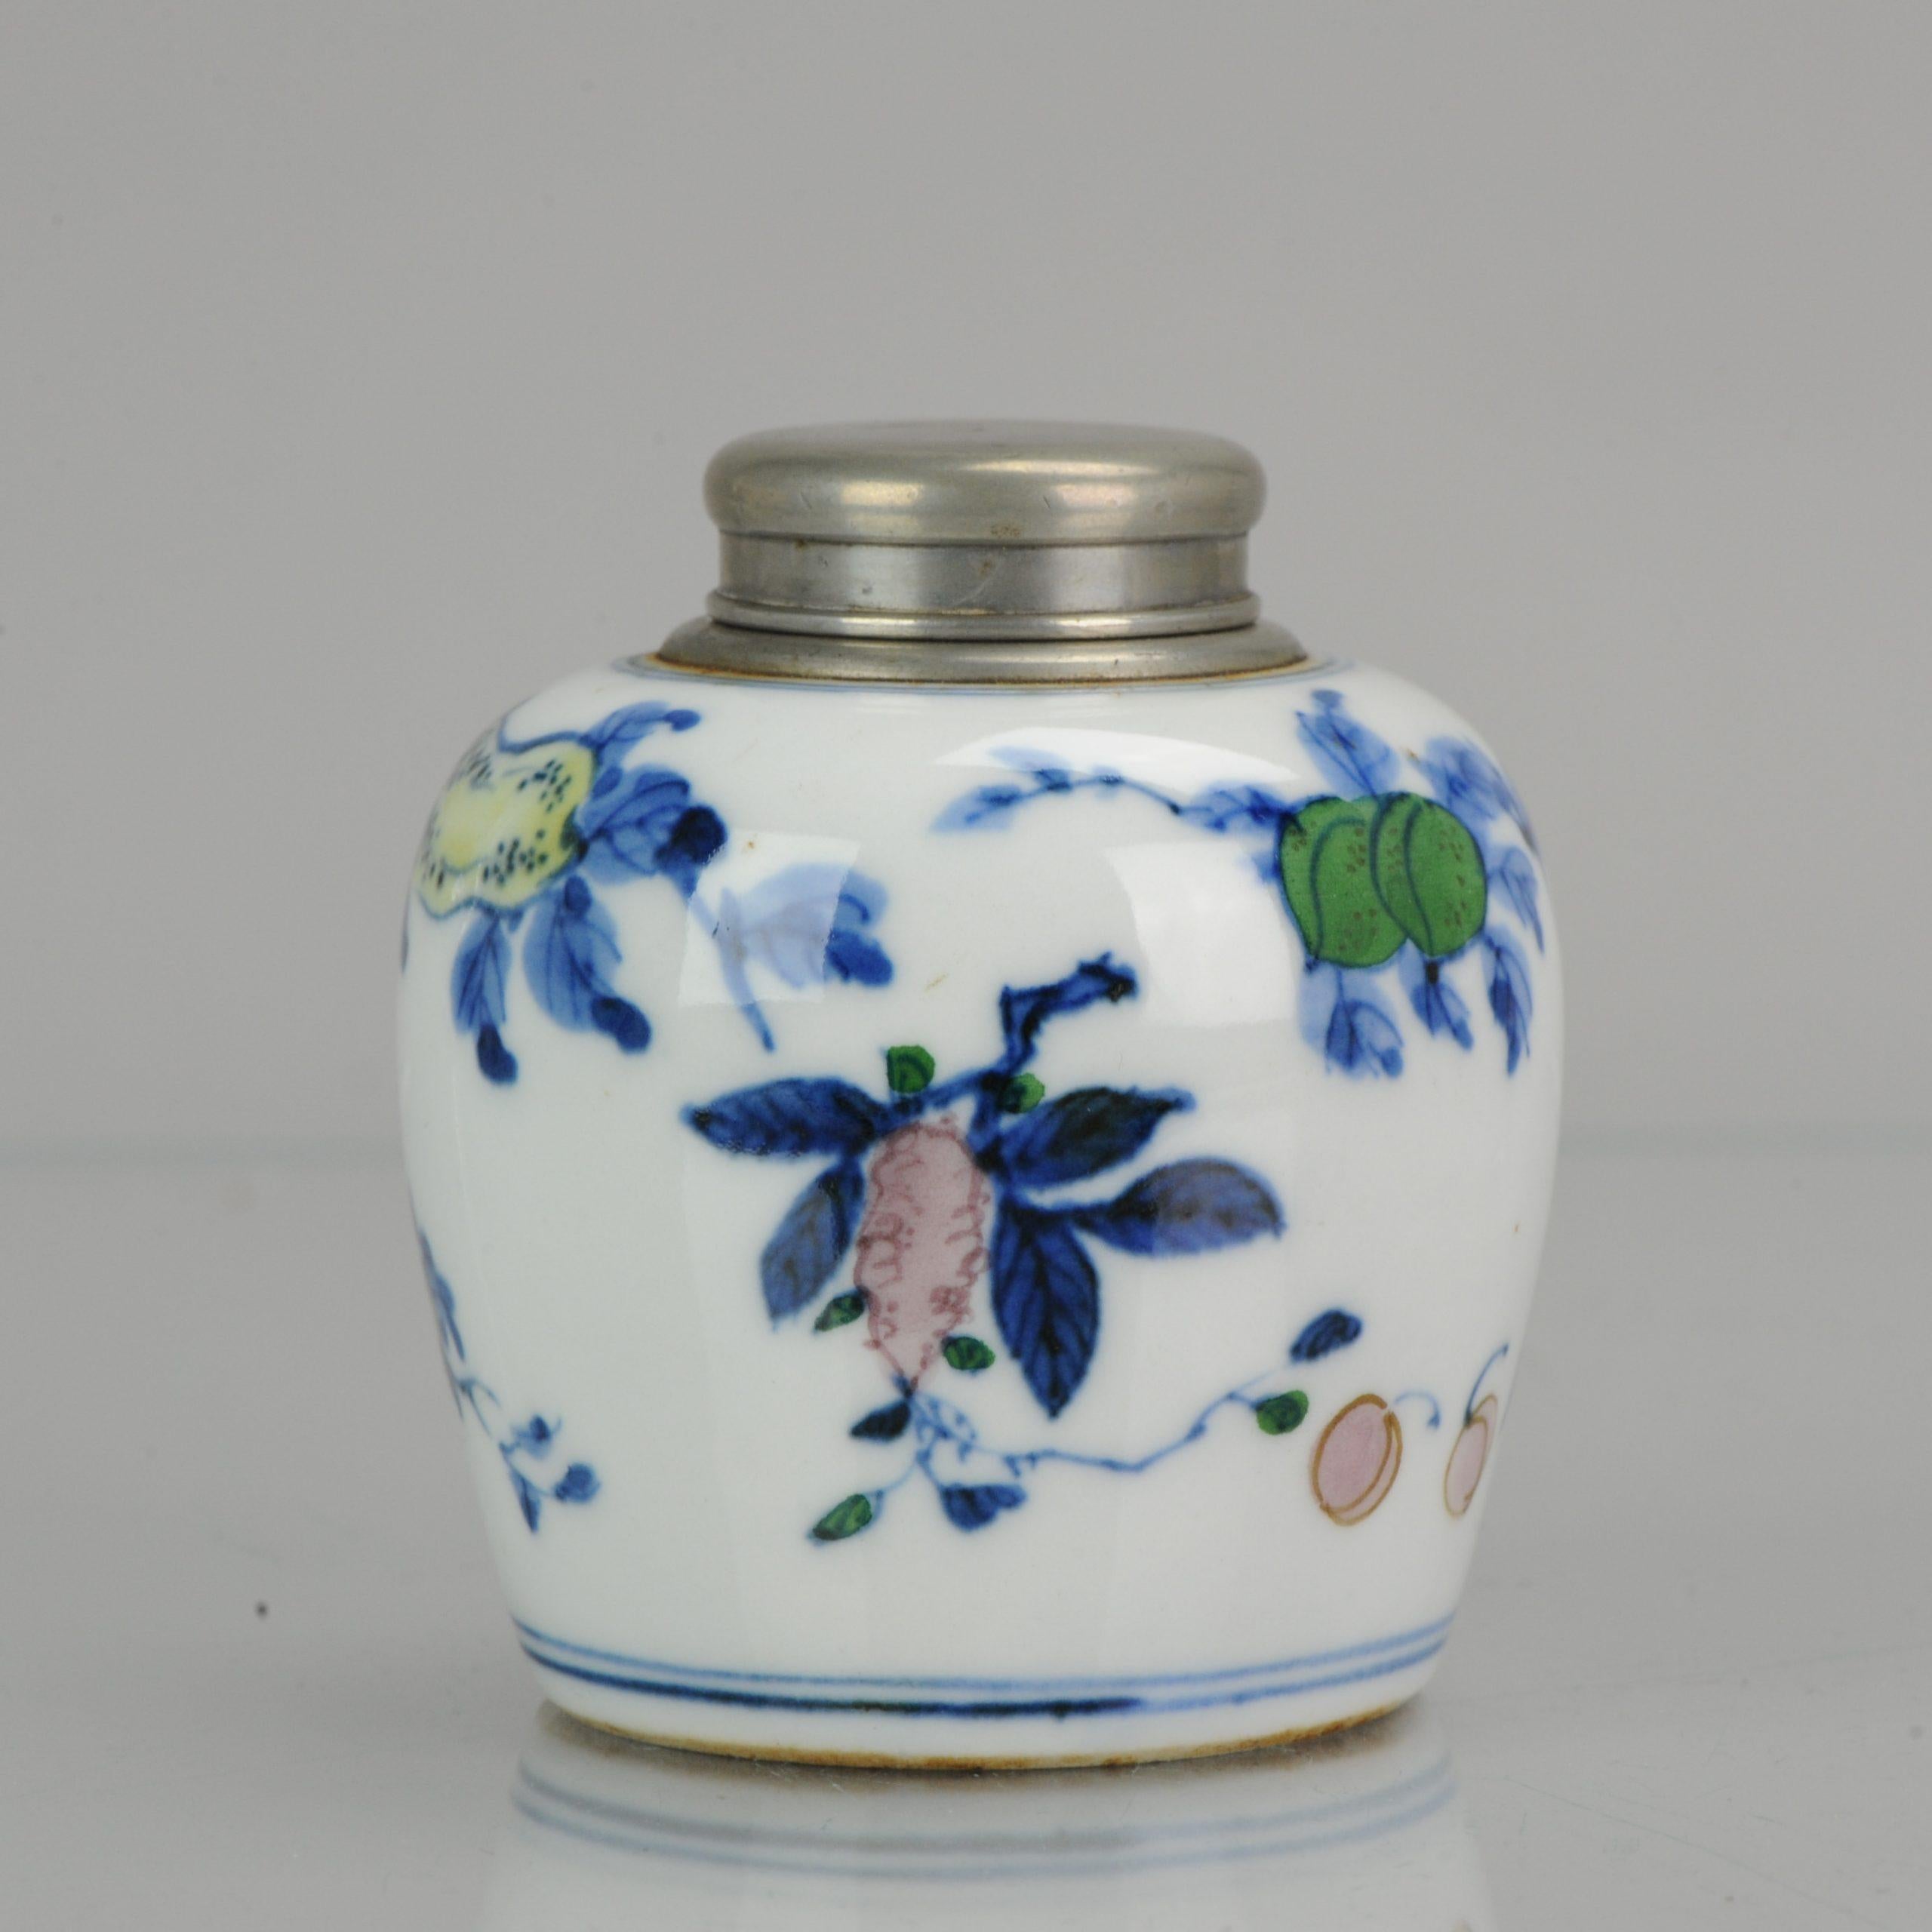 Antique 19th Century Porcelain Doucai Tea Caddy Marked Fruit Decoration Chinese 4